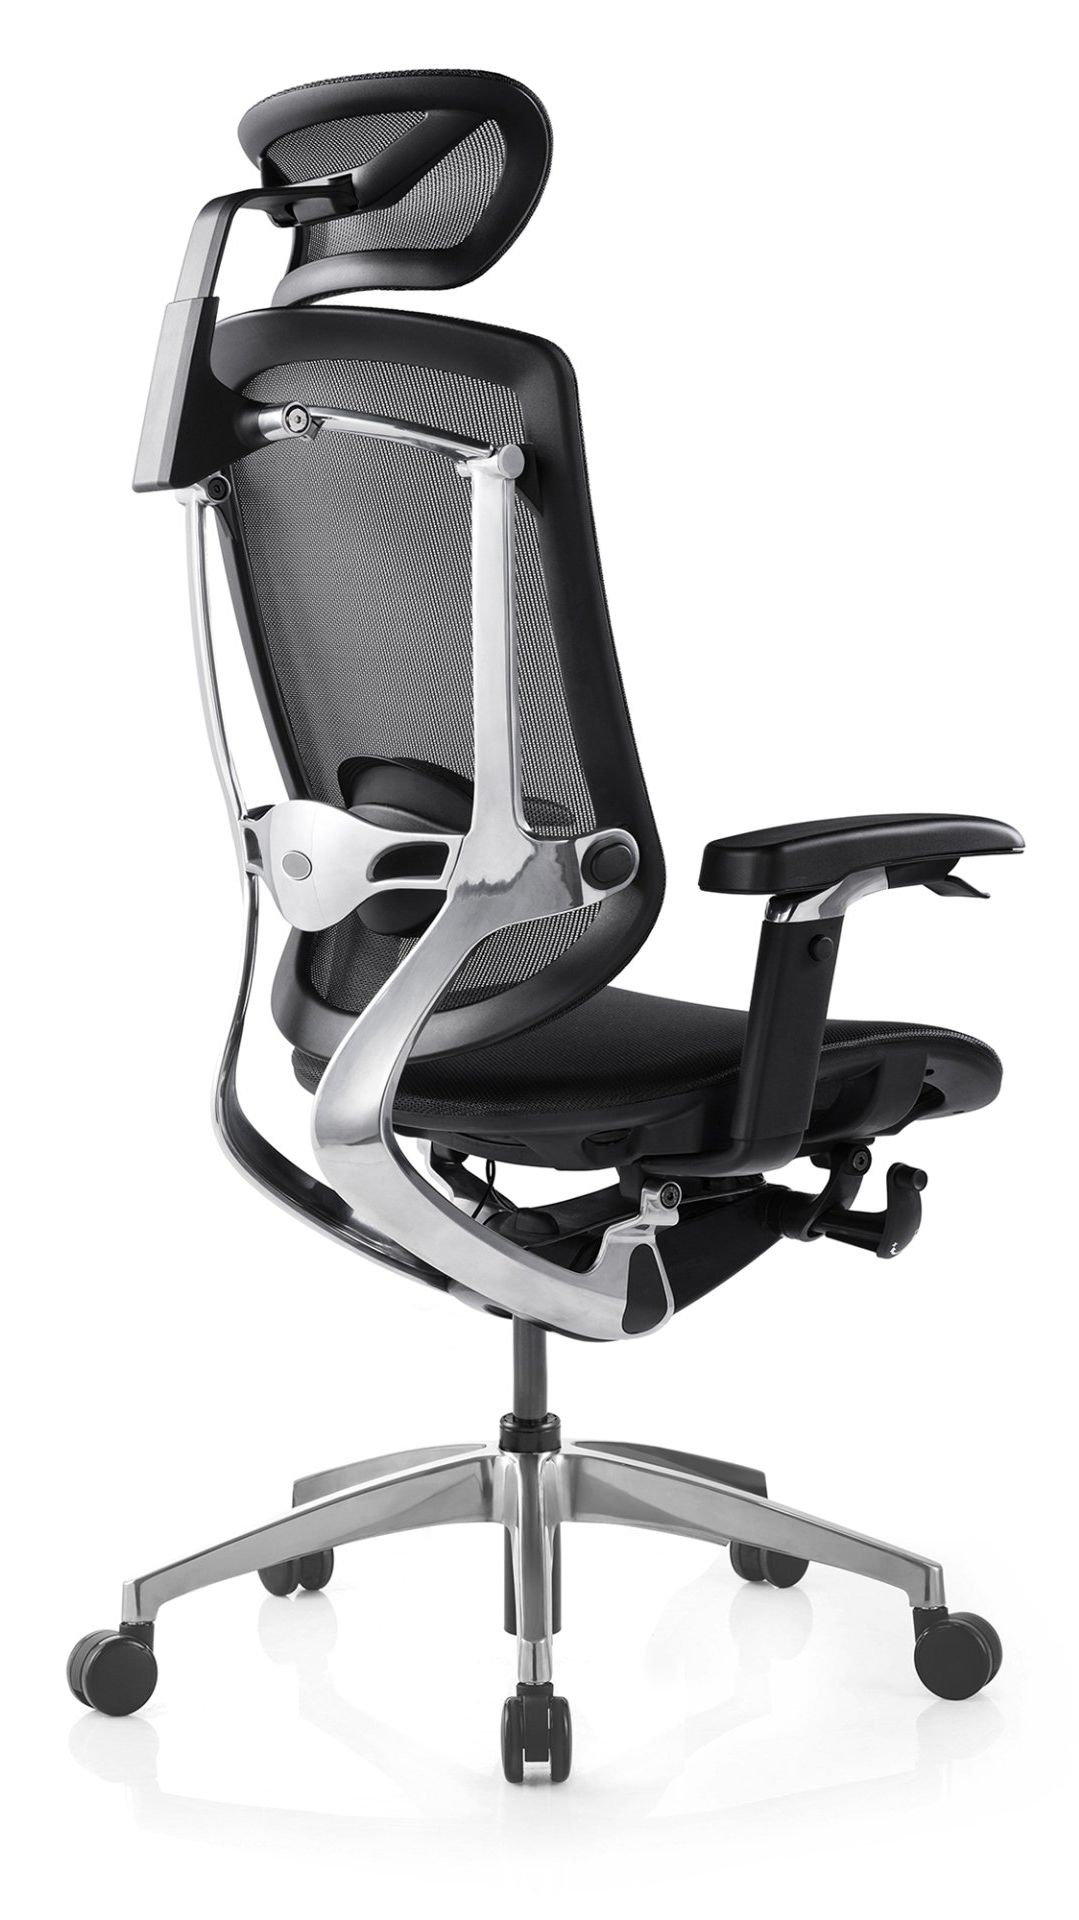 M-Form mesh office chair